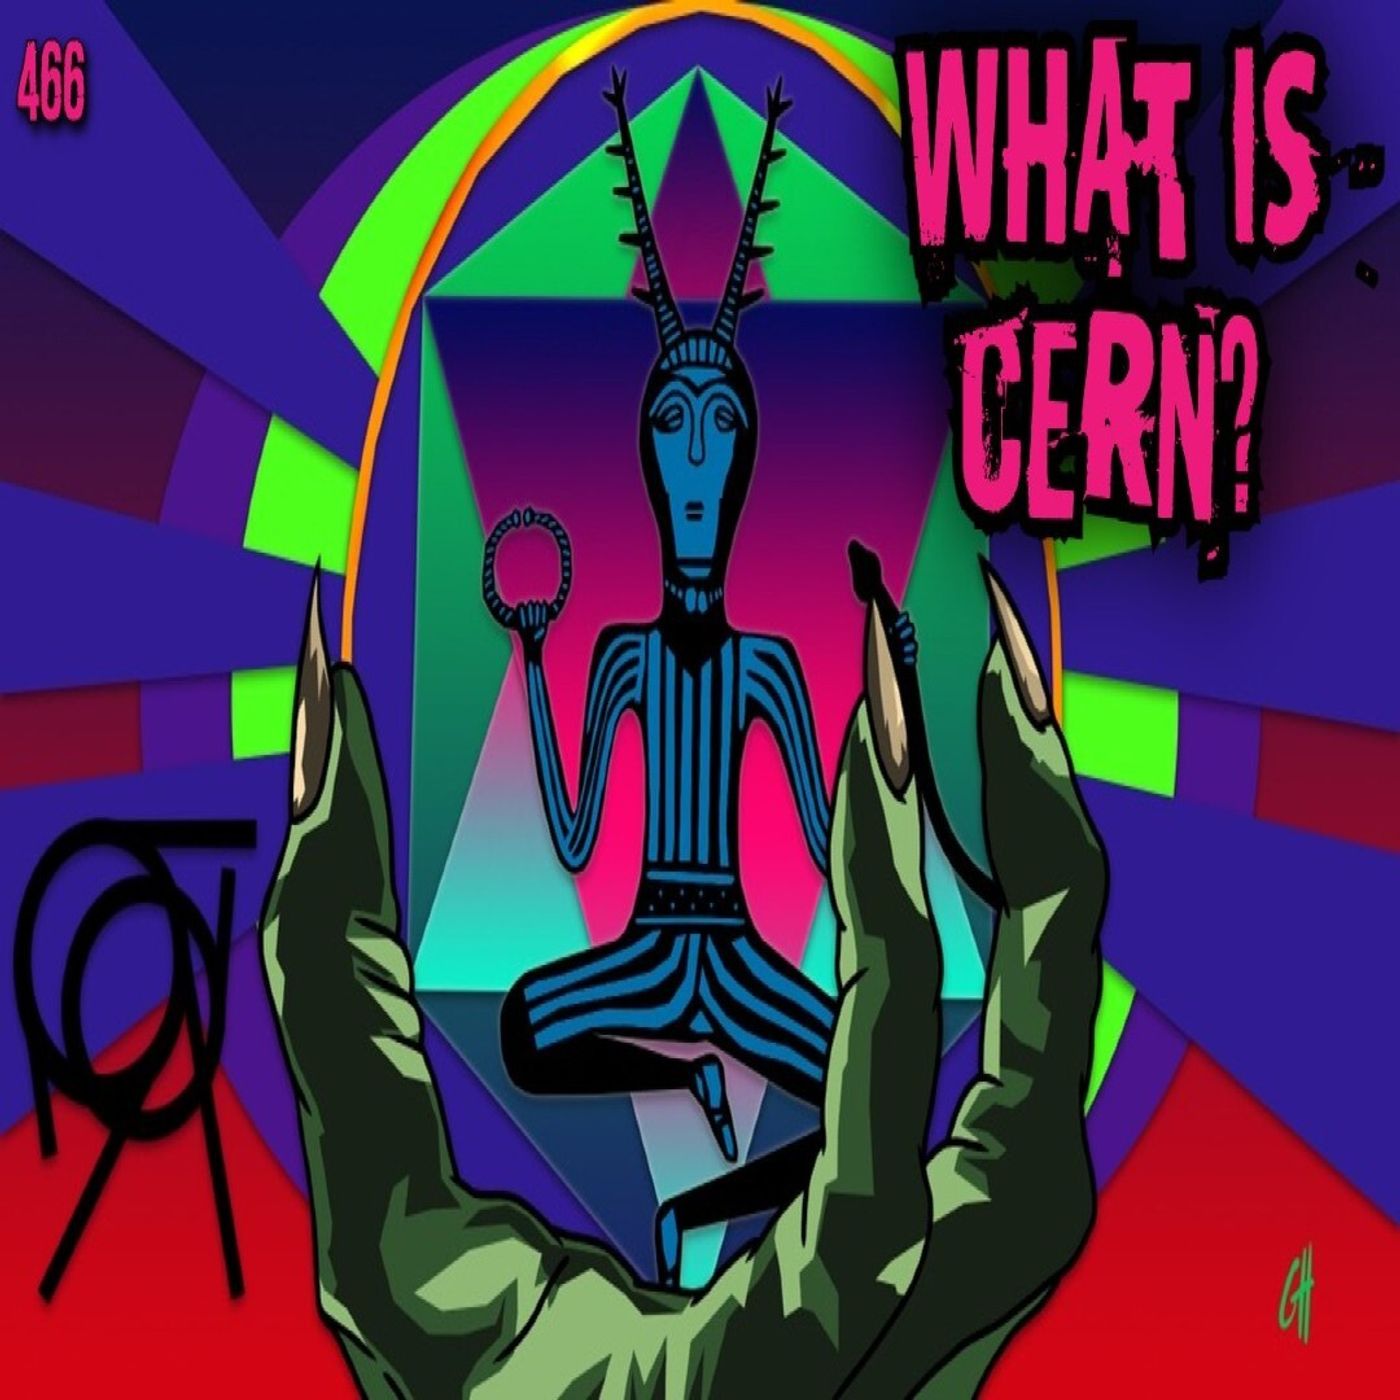 466: What Is CERN?